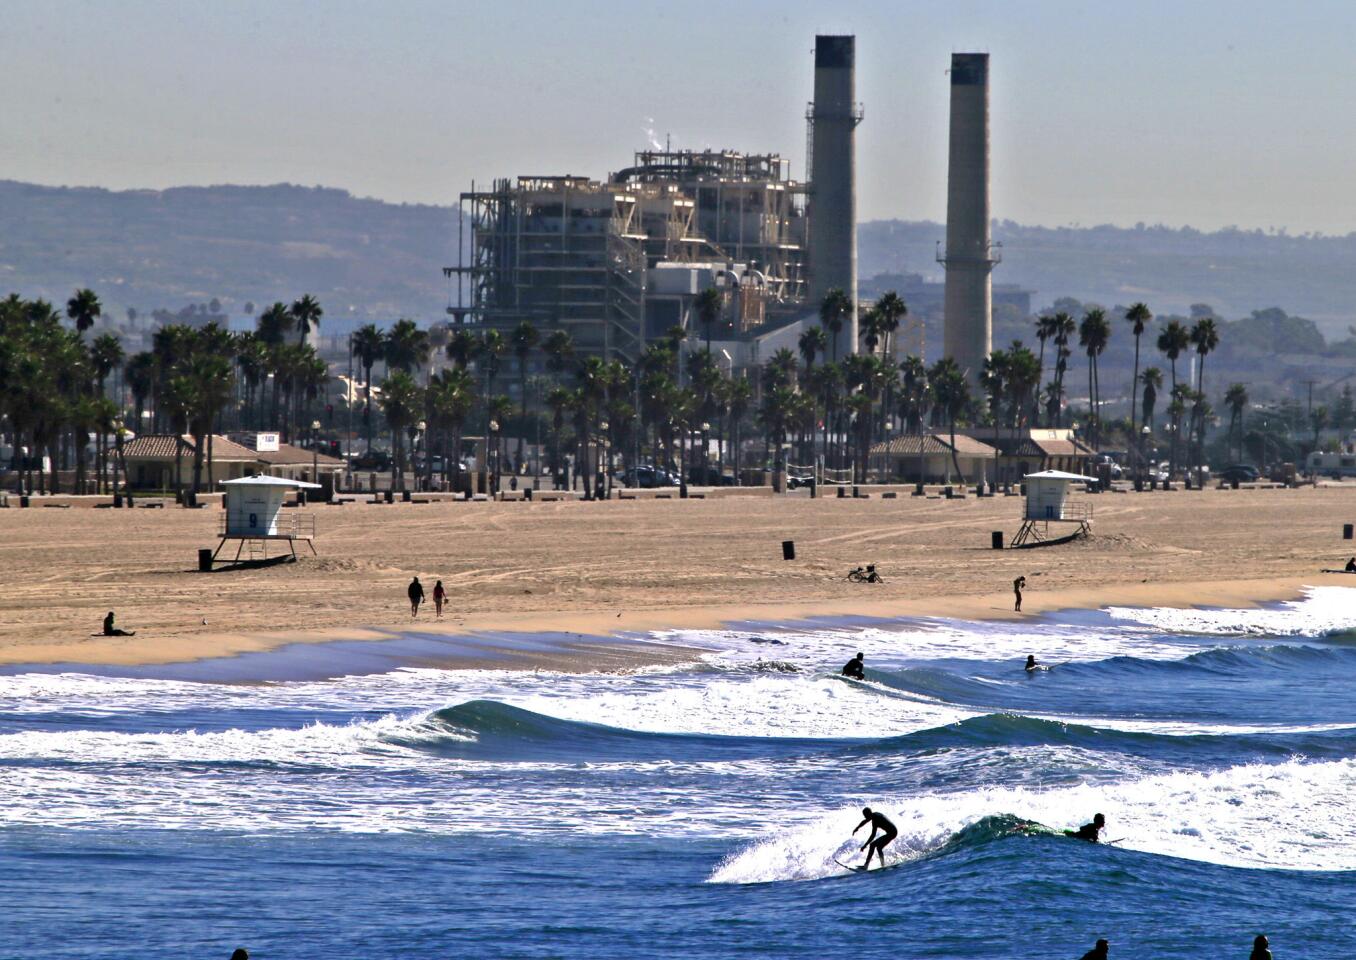 The AES Huntington Beach Generating Station forms a backdrop to surfers enjoying a spring-like November morning. The California Coastal Commission is expected to vote this week on a proposed seawater desalination plant on a portion of the AES site.